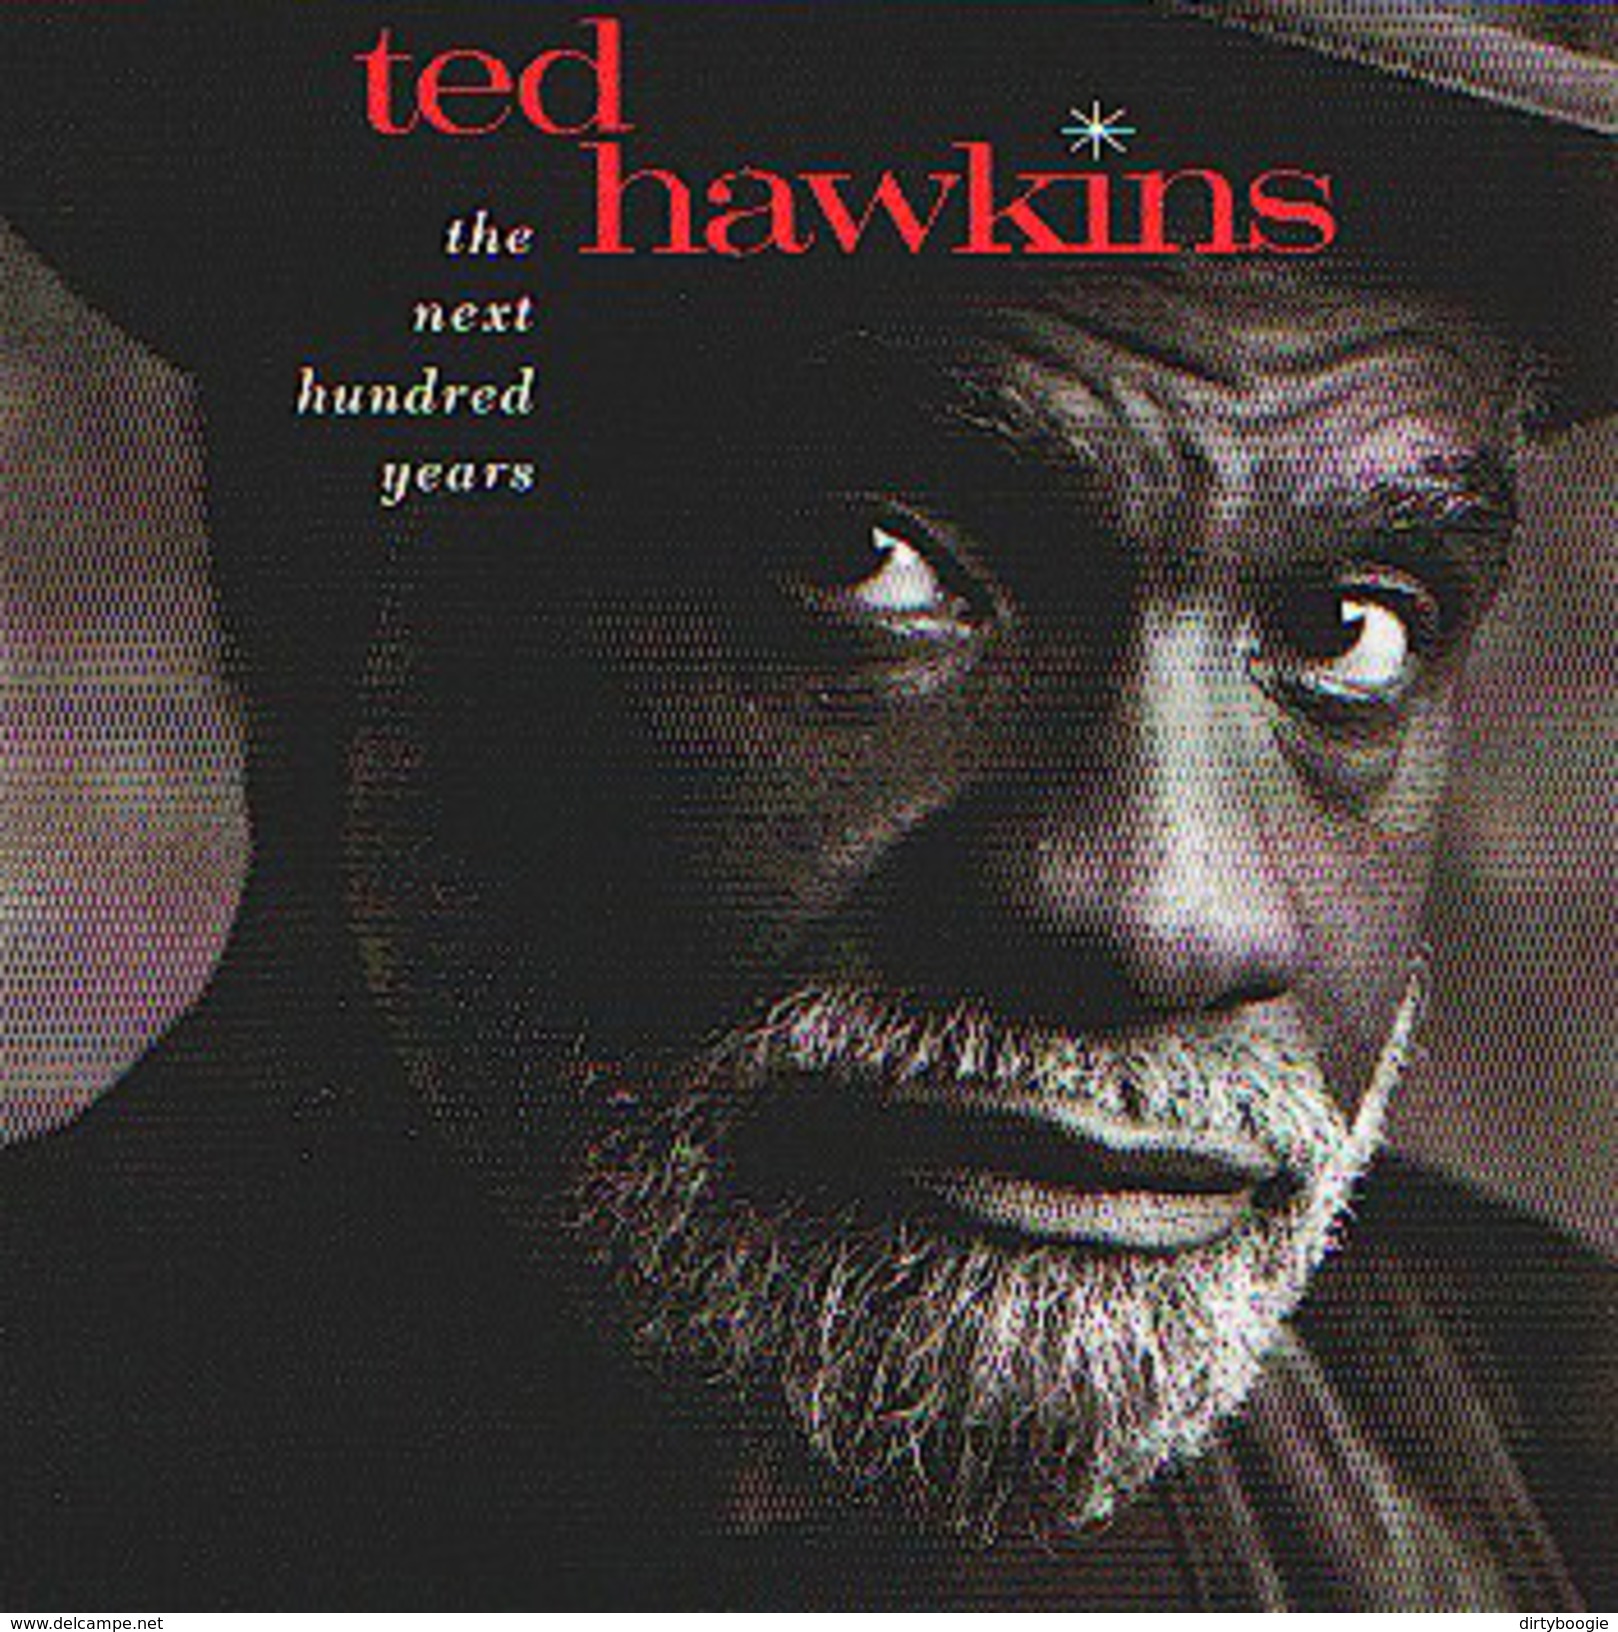 Ted HAWKINS - The Next Hundred Years - CD - COUNTRY FOLK BLUES - Country Et Folk